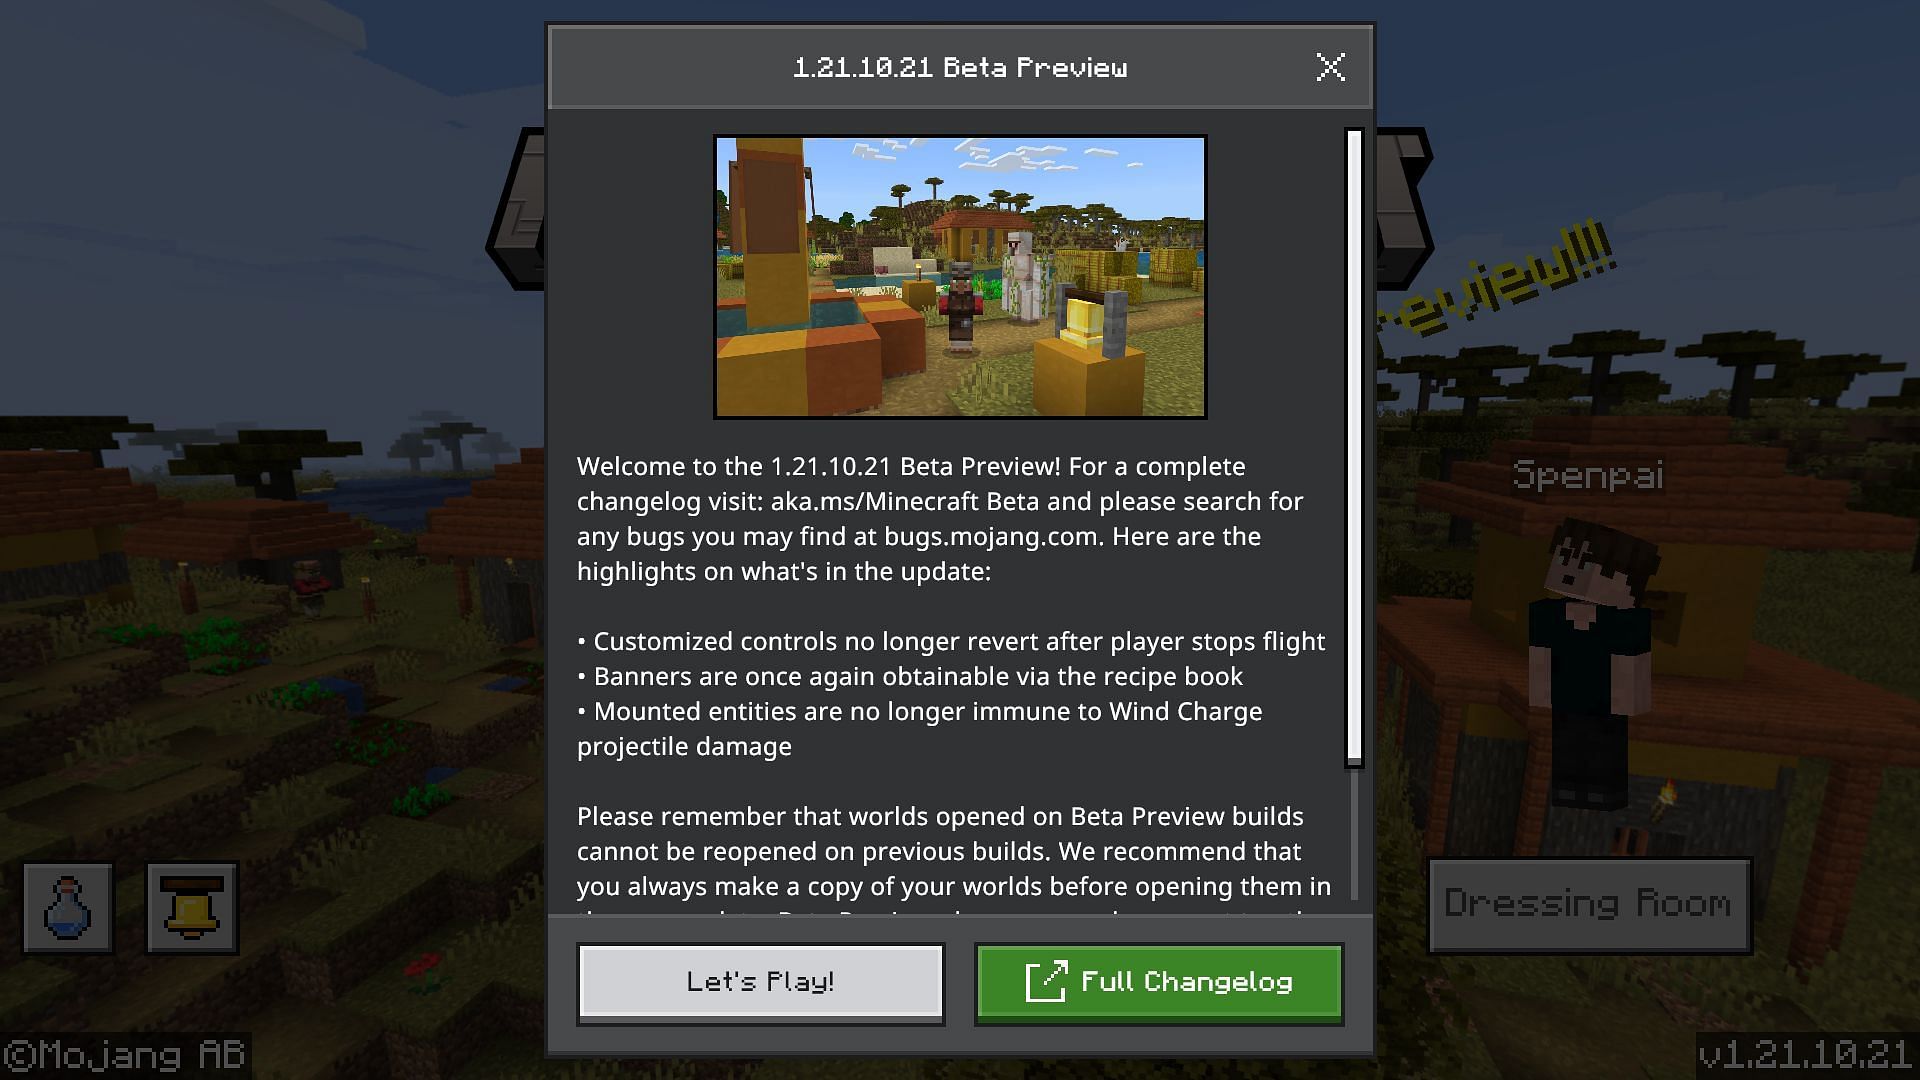 How to download Minecraft Bedrock 1.21.10.21 beta and preview